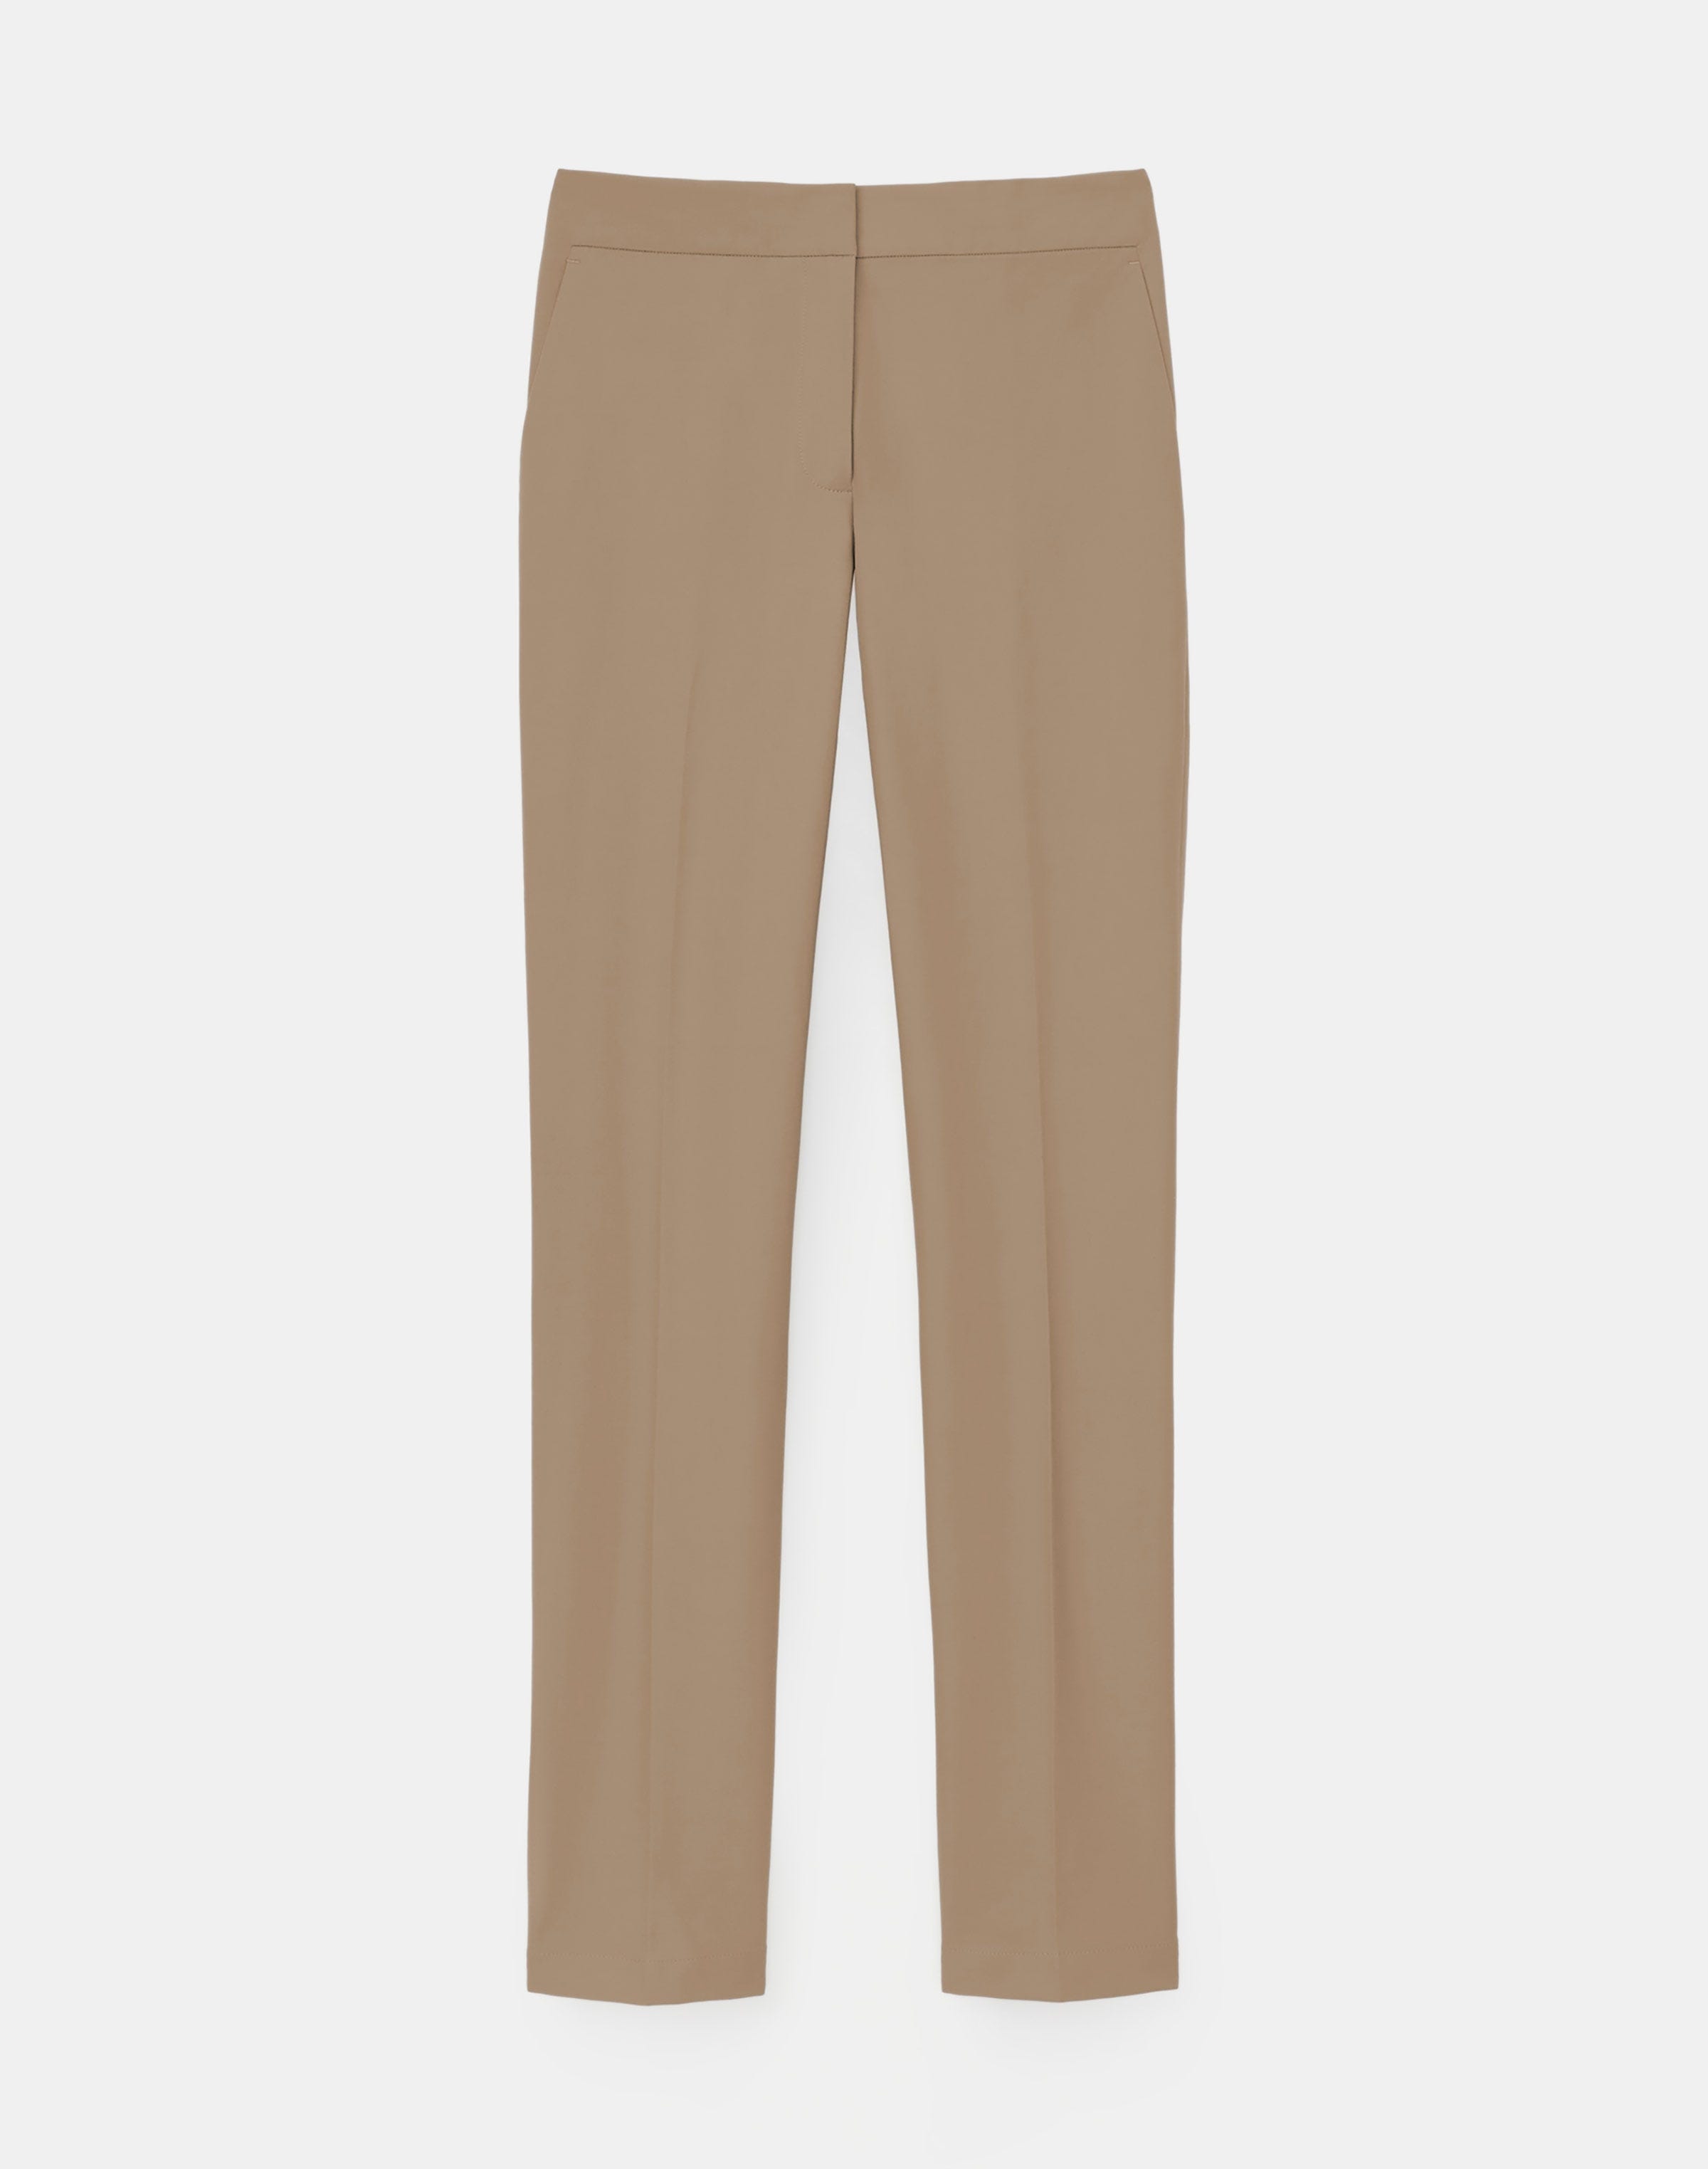 Lafayette 148 Stretch Twill Manhattan Skinny Ankle Pant In Brown